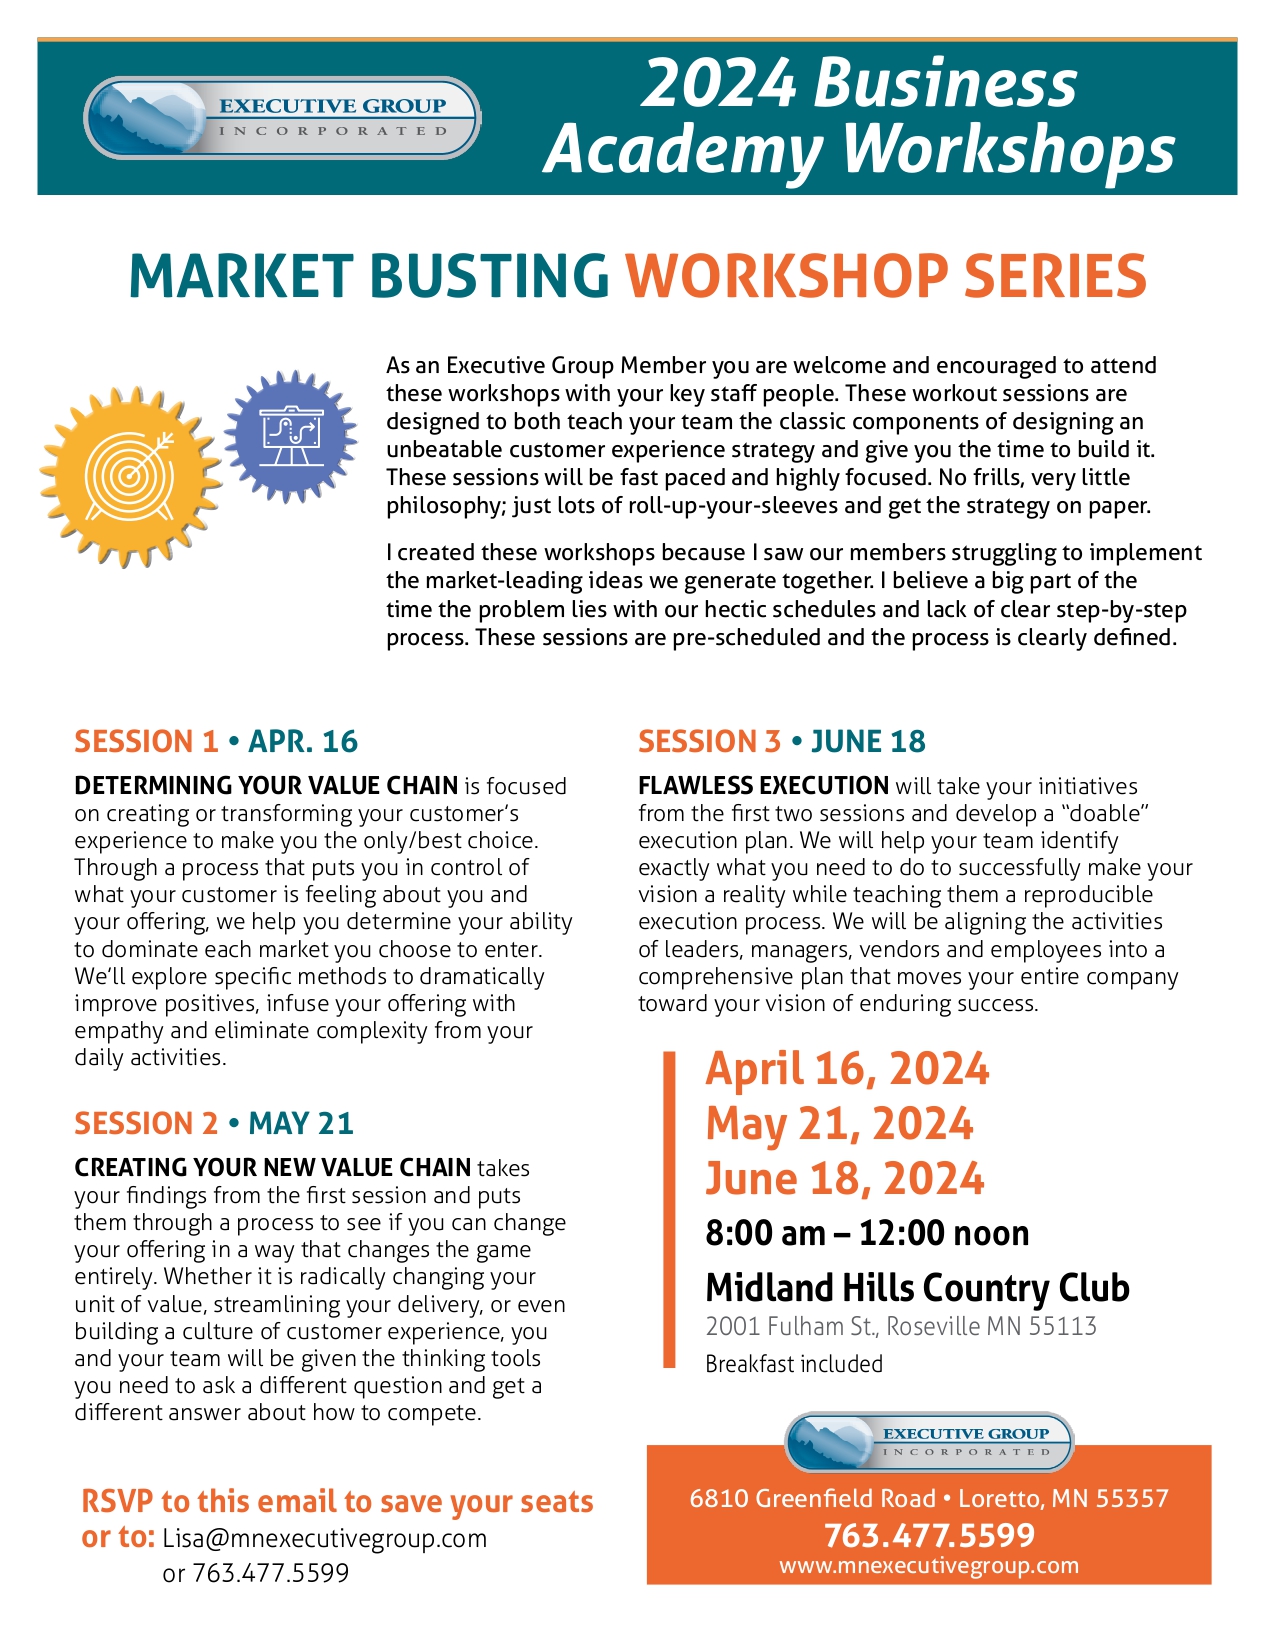 Flyer with information about Market Busting Workshop Series 2024